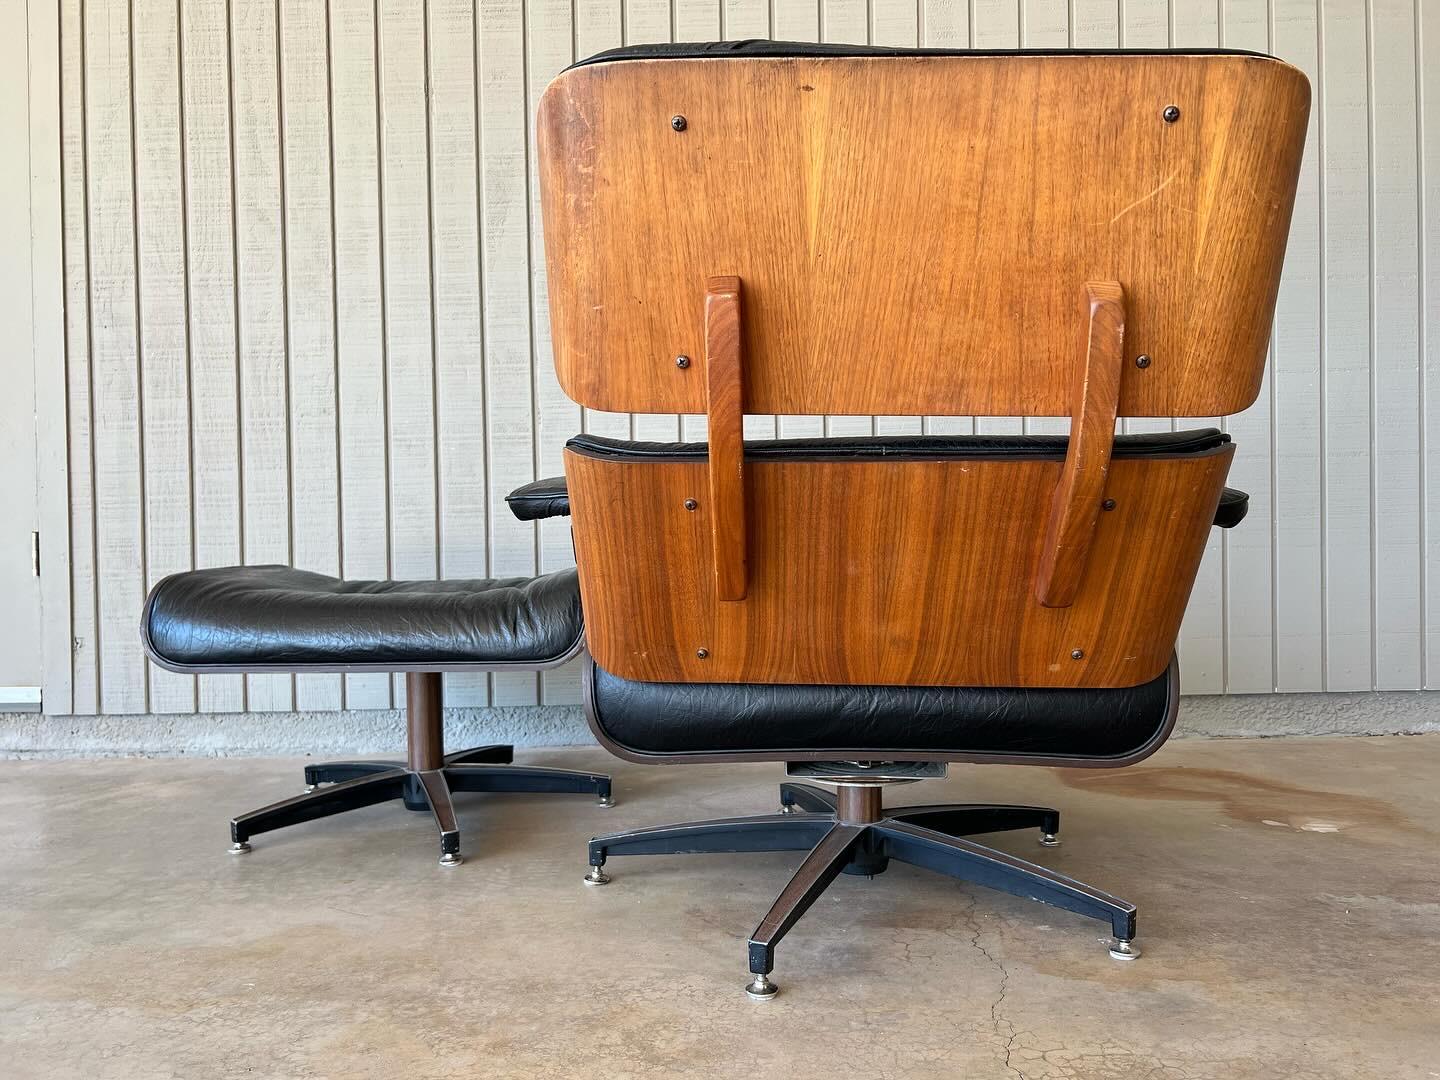 1970s vintage Charlton Company, Inc. mid century modern lounge chair and ottoman in walnut with original black vinyl. The chair swivels, tilts and rocks with its original sturdy Lester mechanism. The ottoman swivels. The extra bounce and rotating